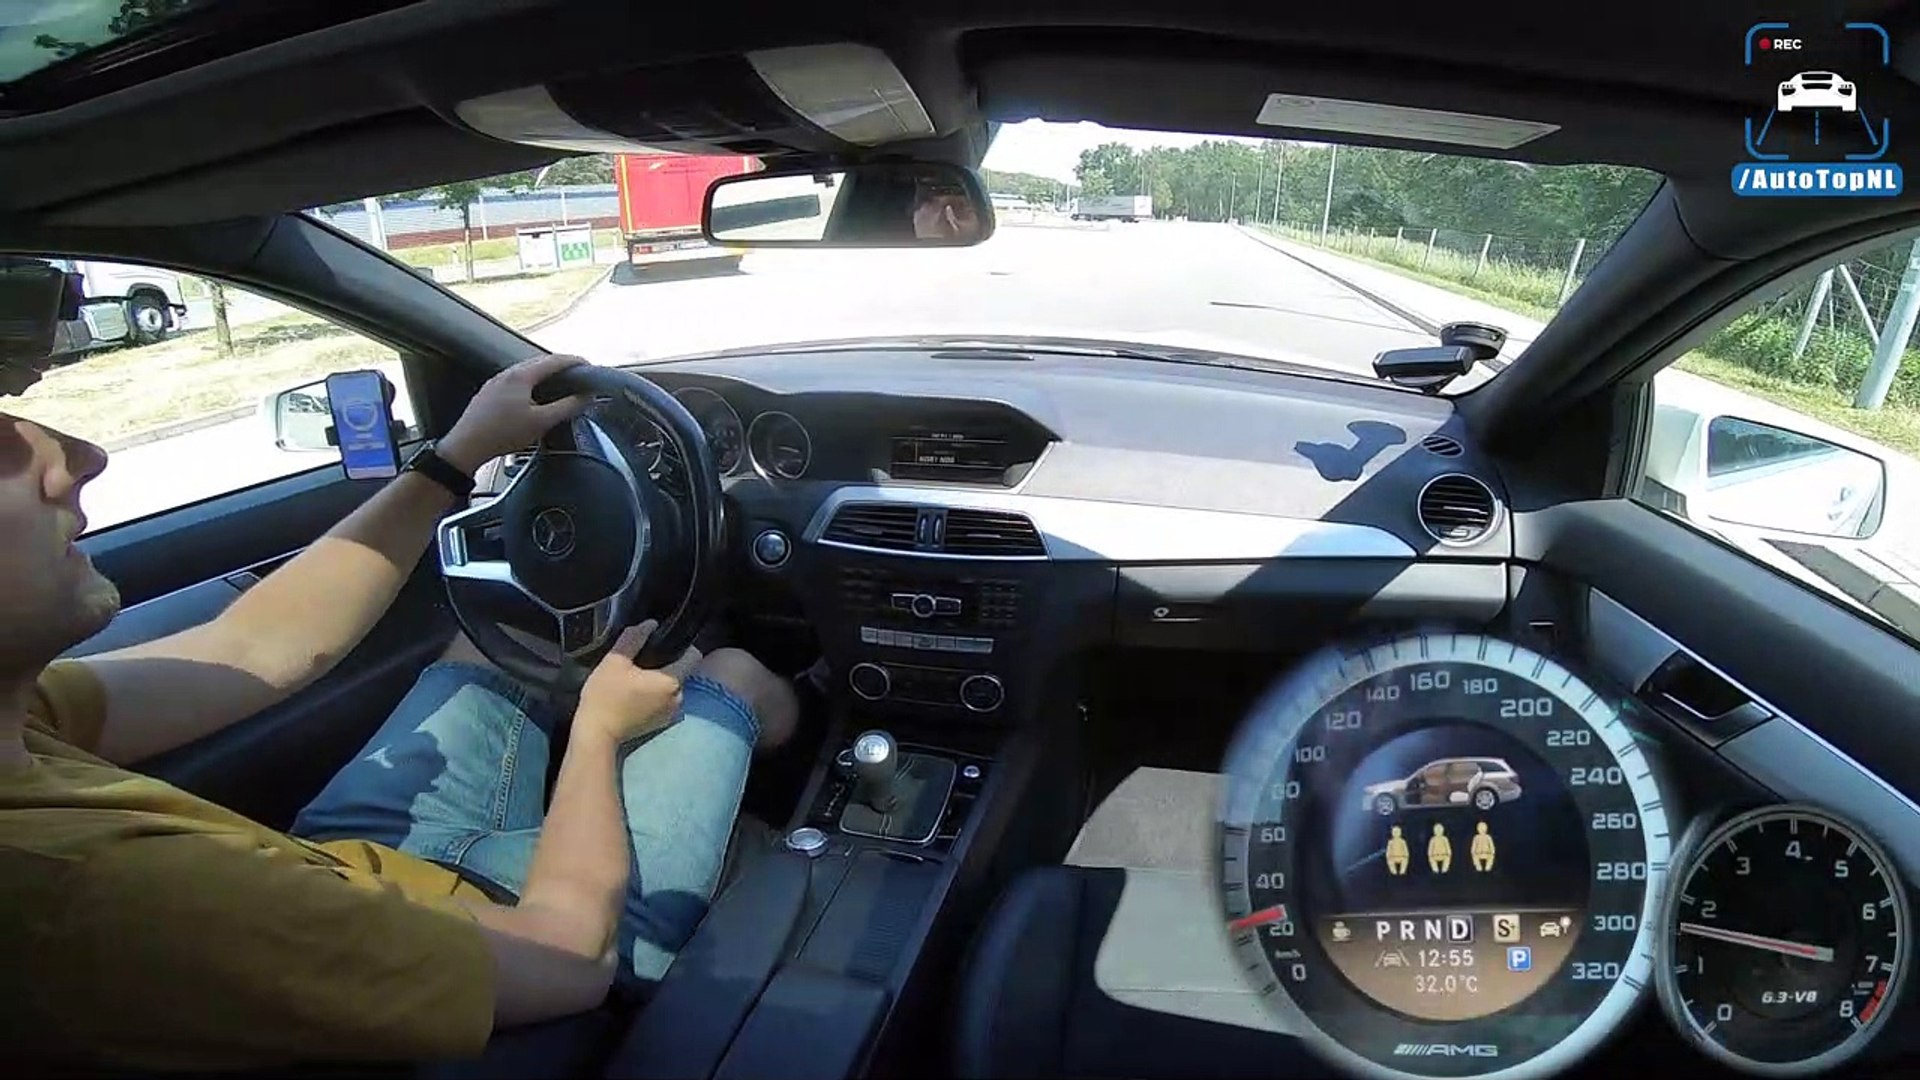 630HP C63 AMG SUPERCHARGED Elmerhaus on AUTOBAHN by AutoTopNL